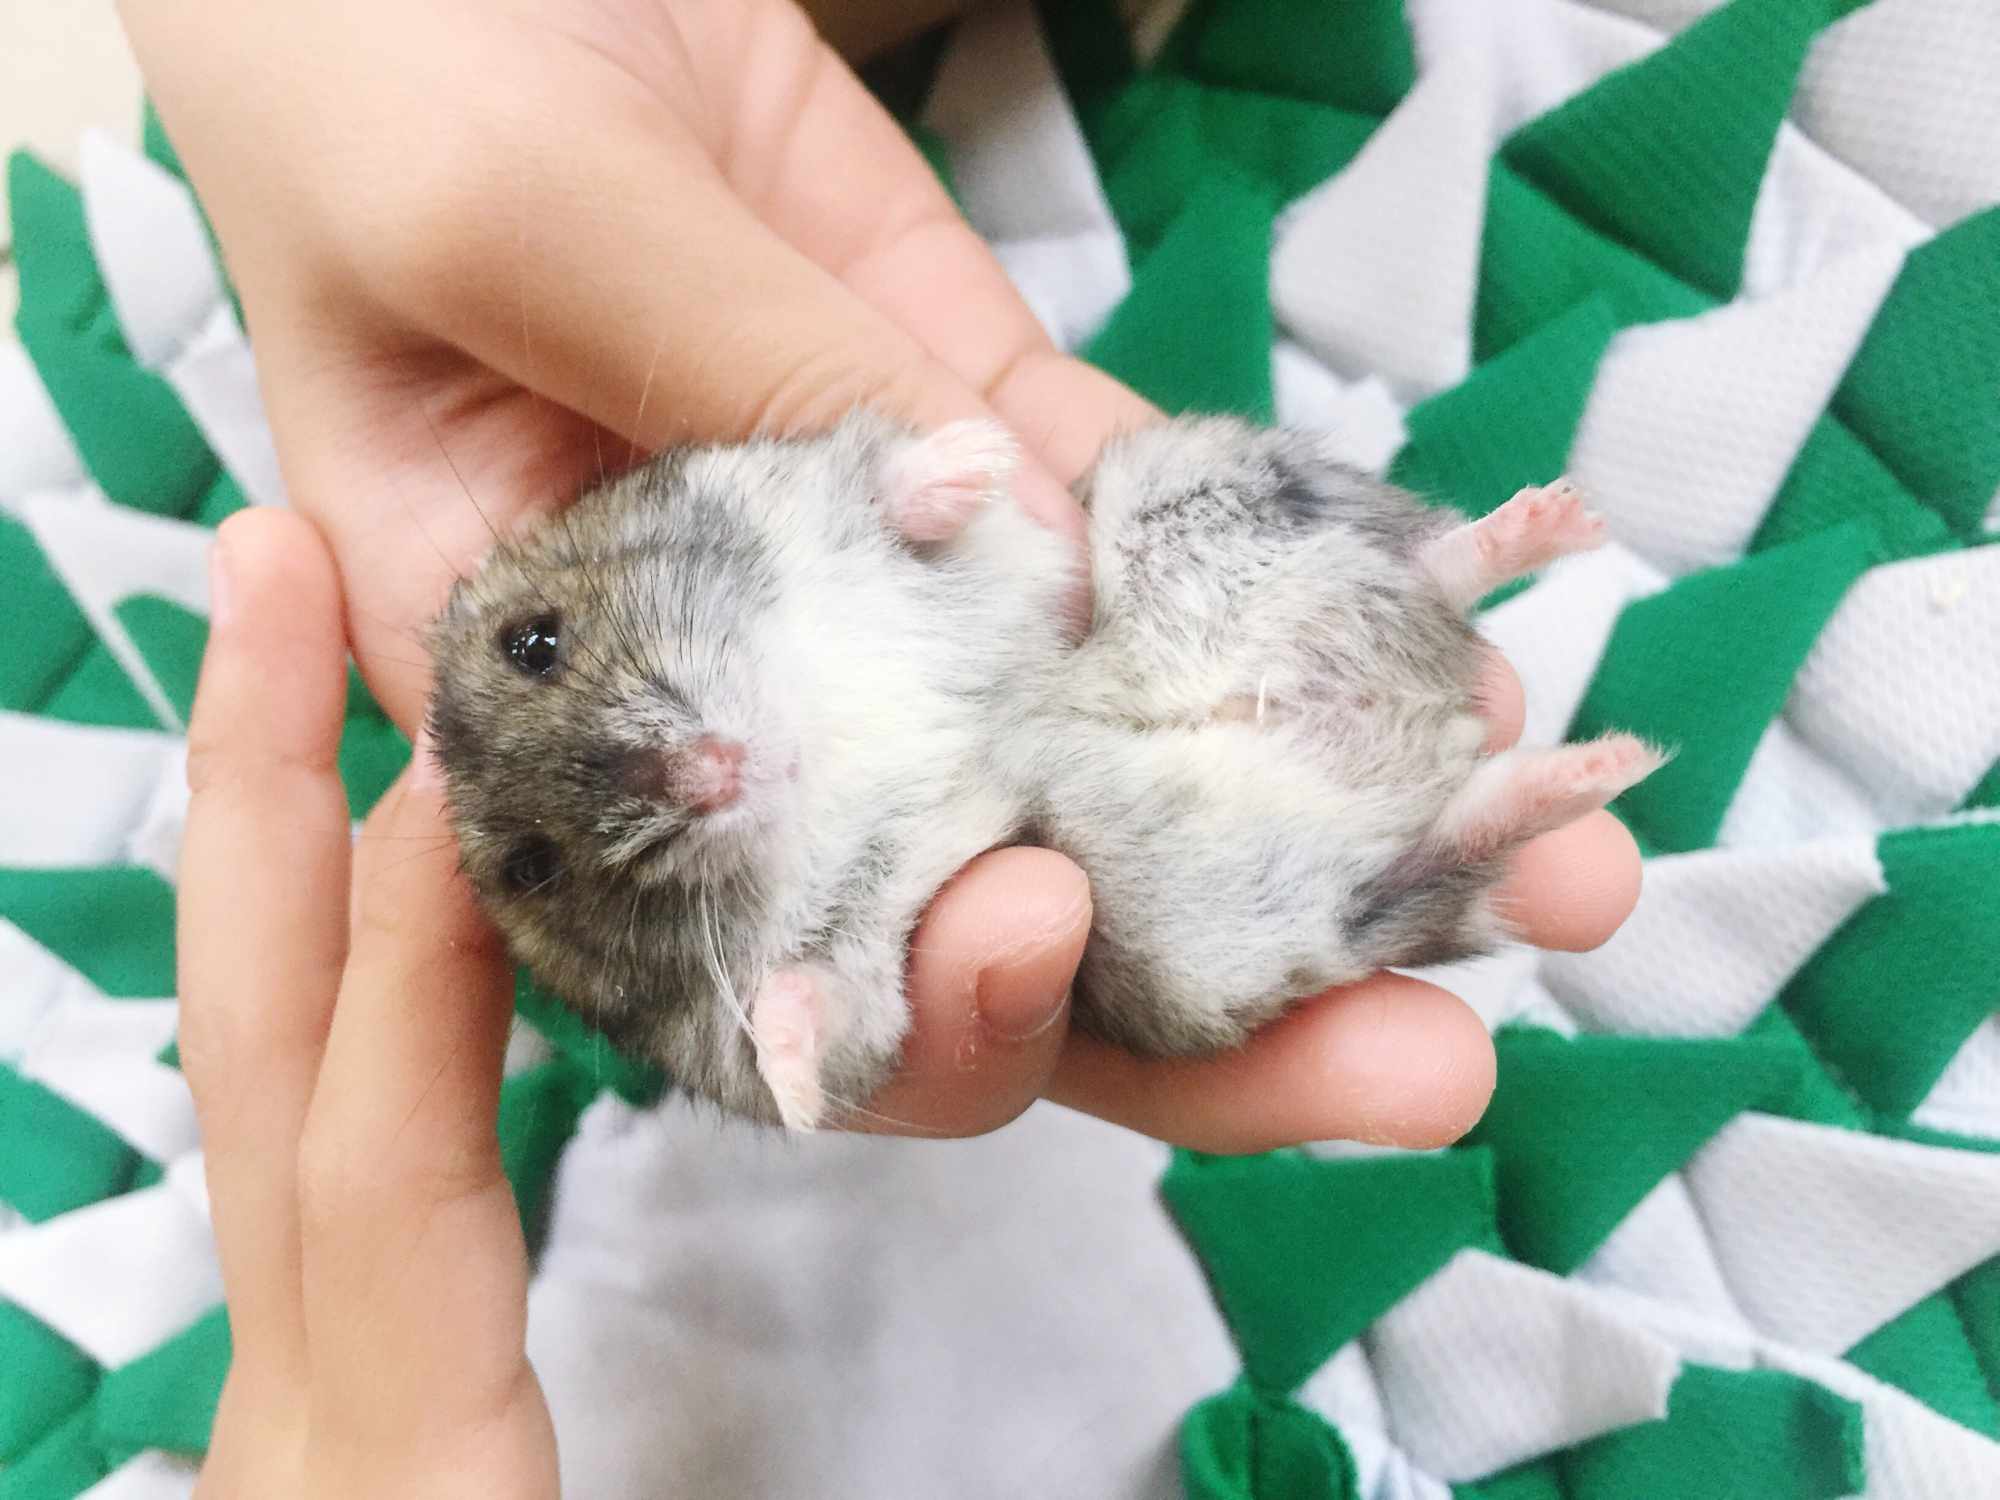 Holding hamster to show its belly